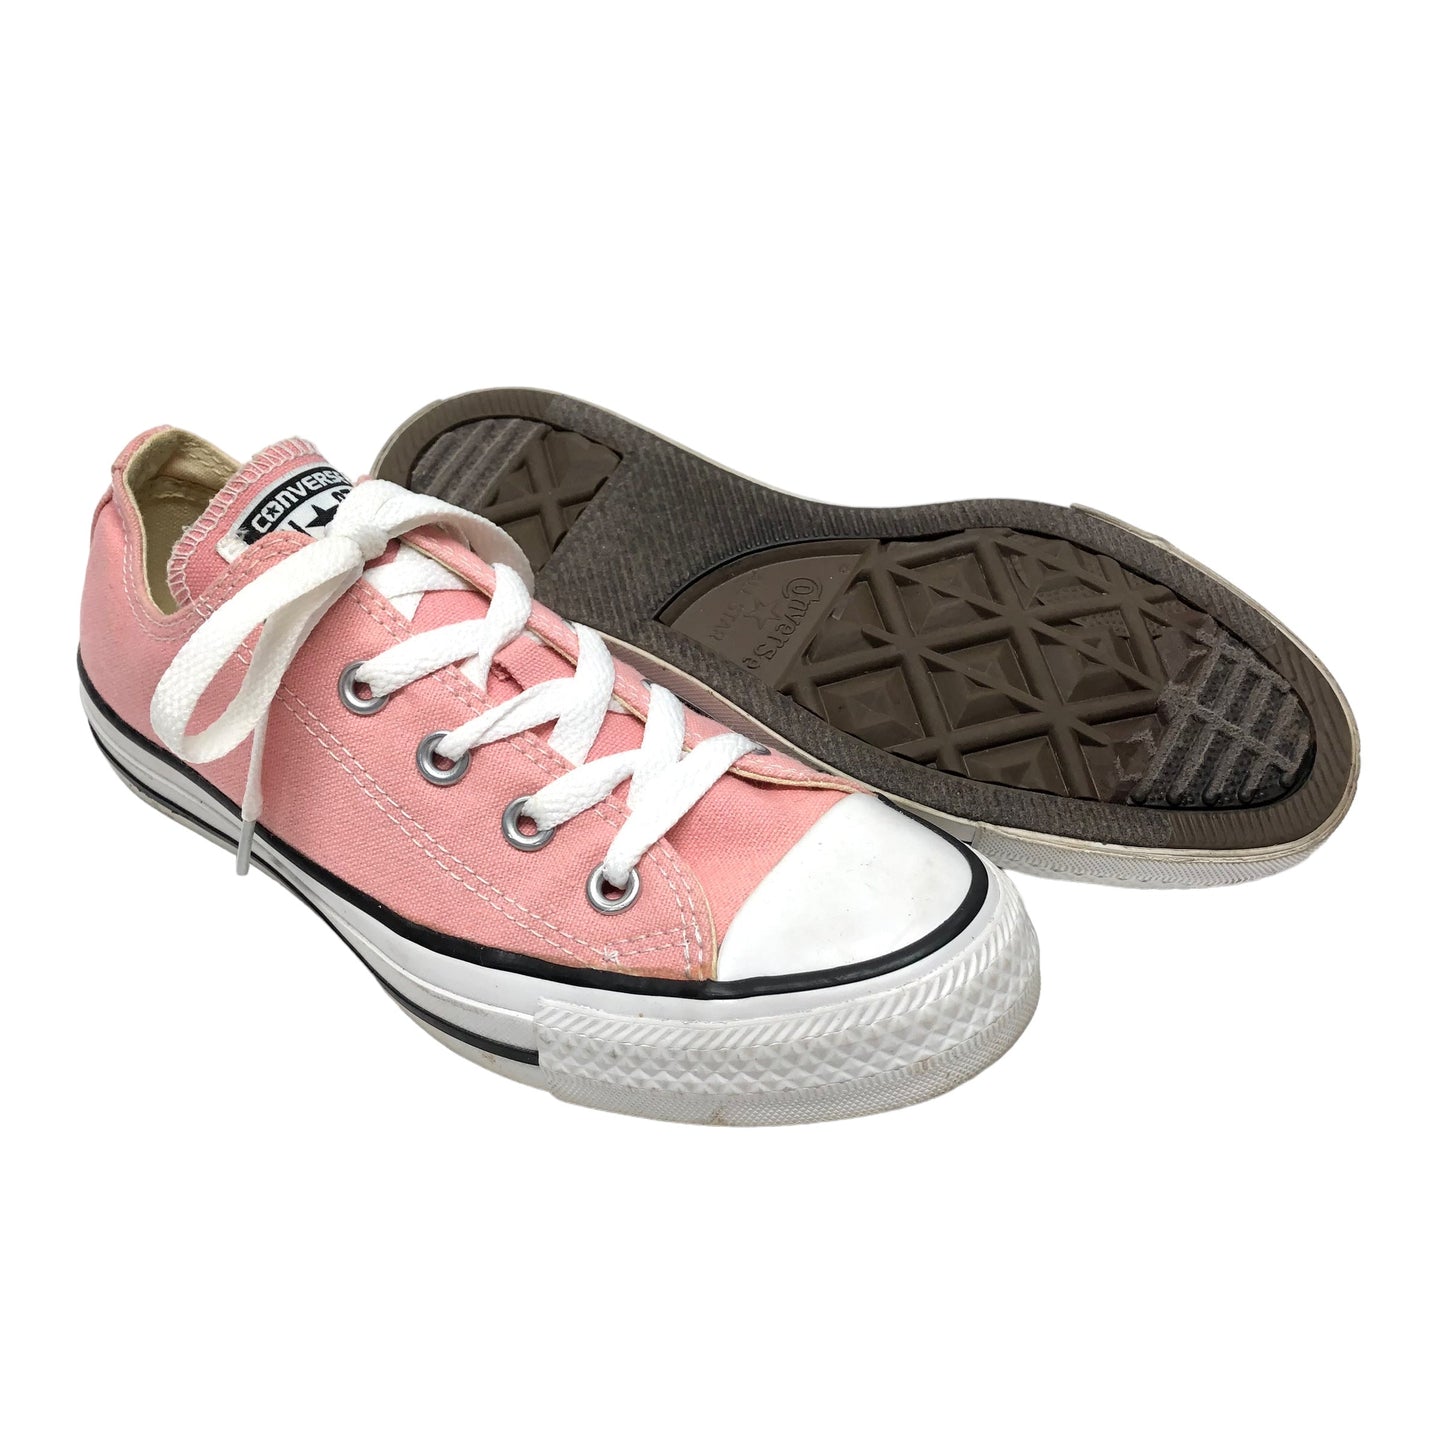 Pink Shoes Sneakers Converse, Size 6